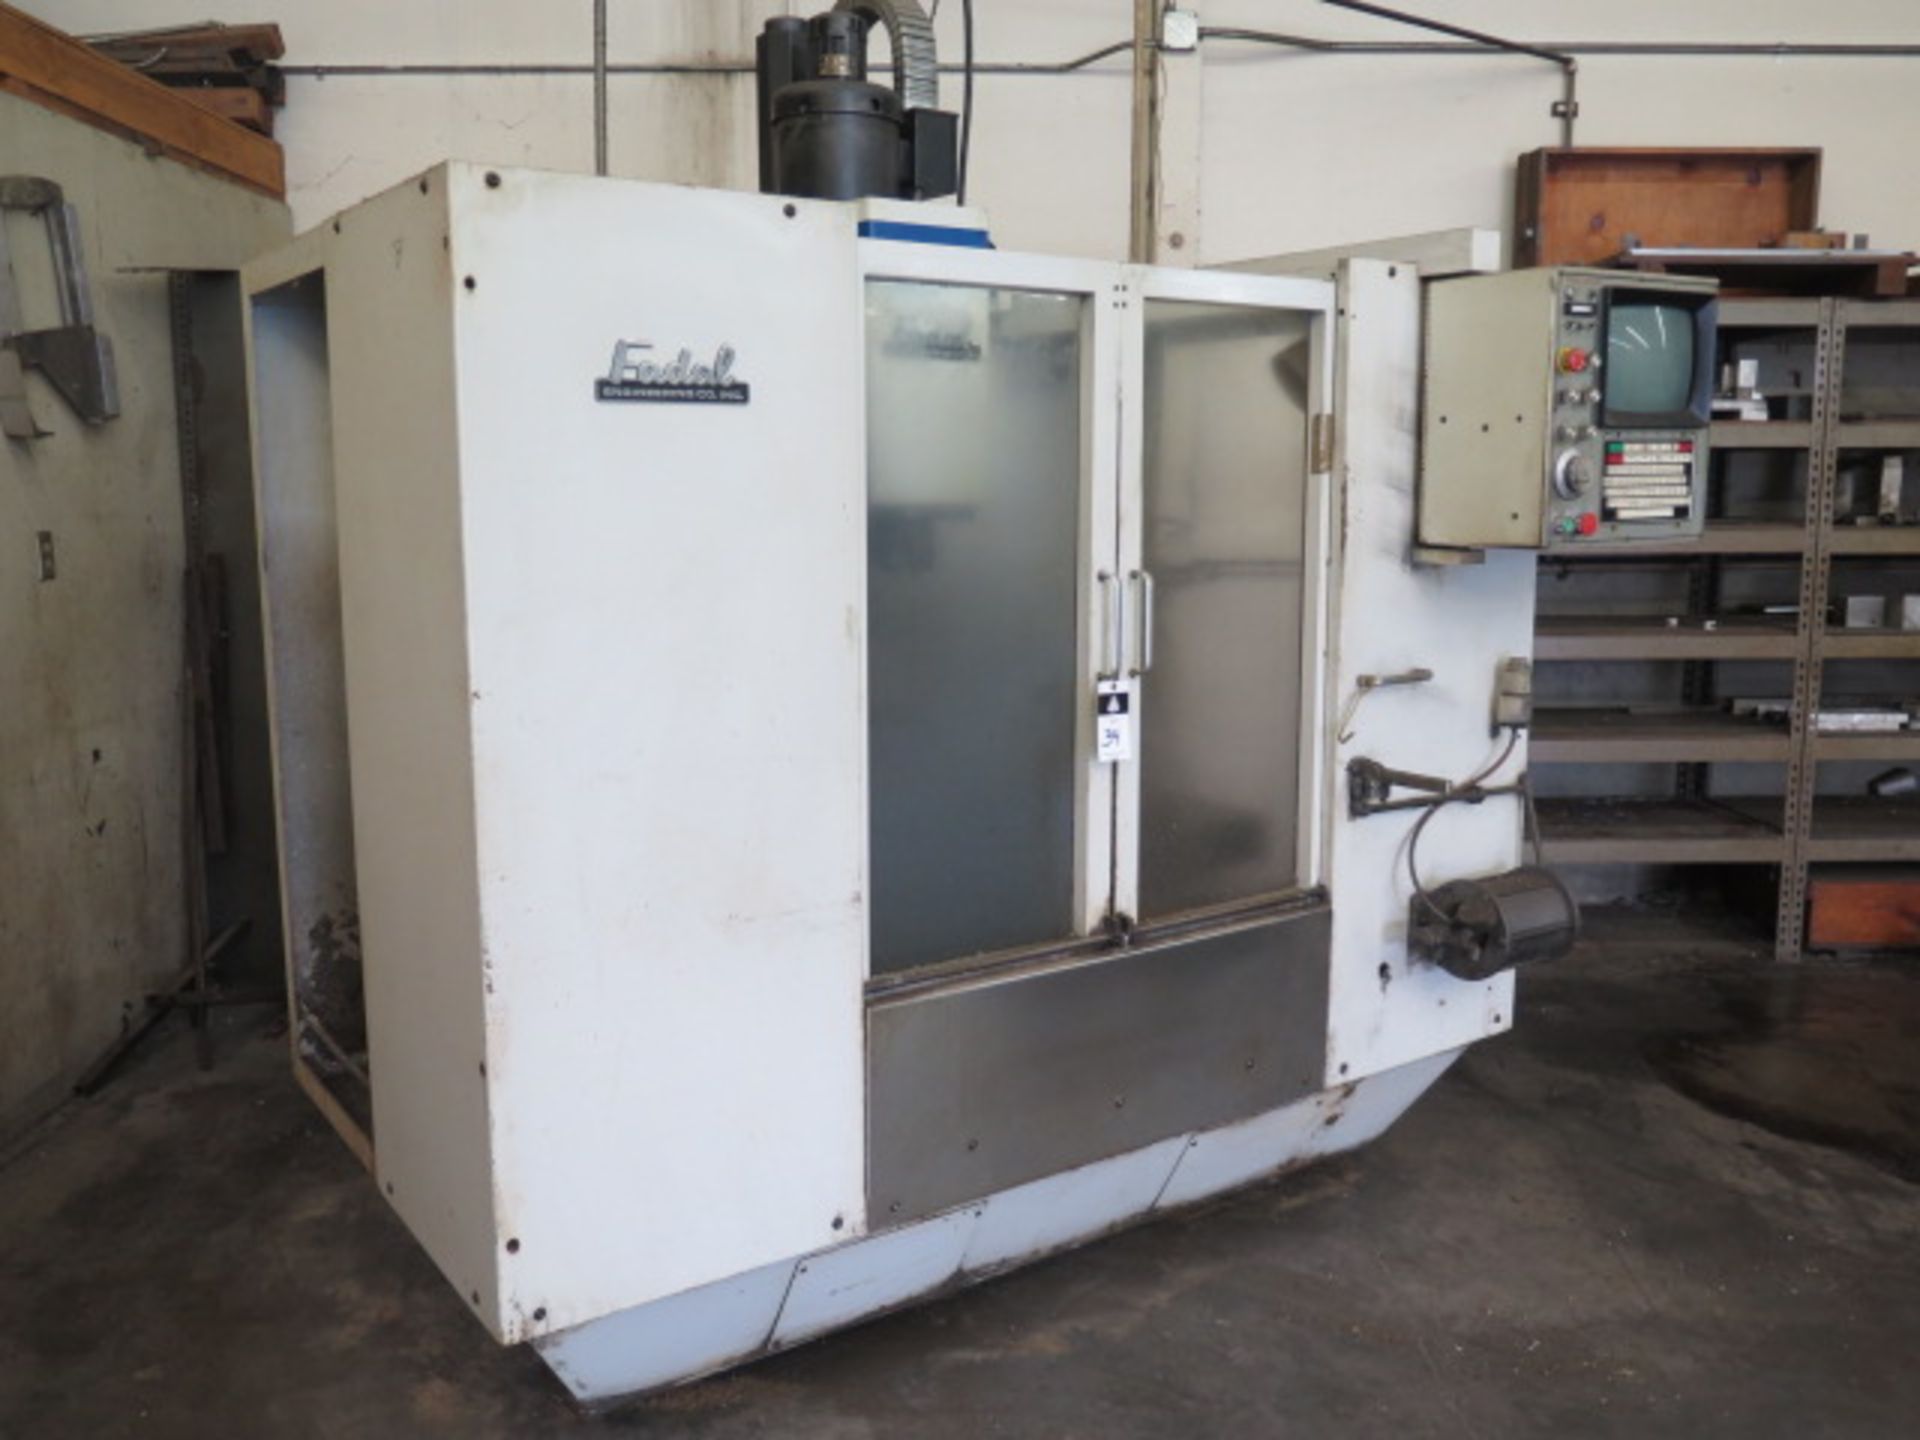 Fadal VMC40 CNC VMC s/n 8707834 w/ Fadal CNC88 Controls, 21-Station ATC, SOLD AS IS - Image 2 of 14